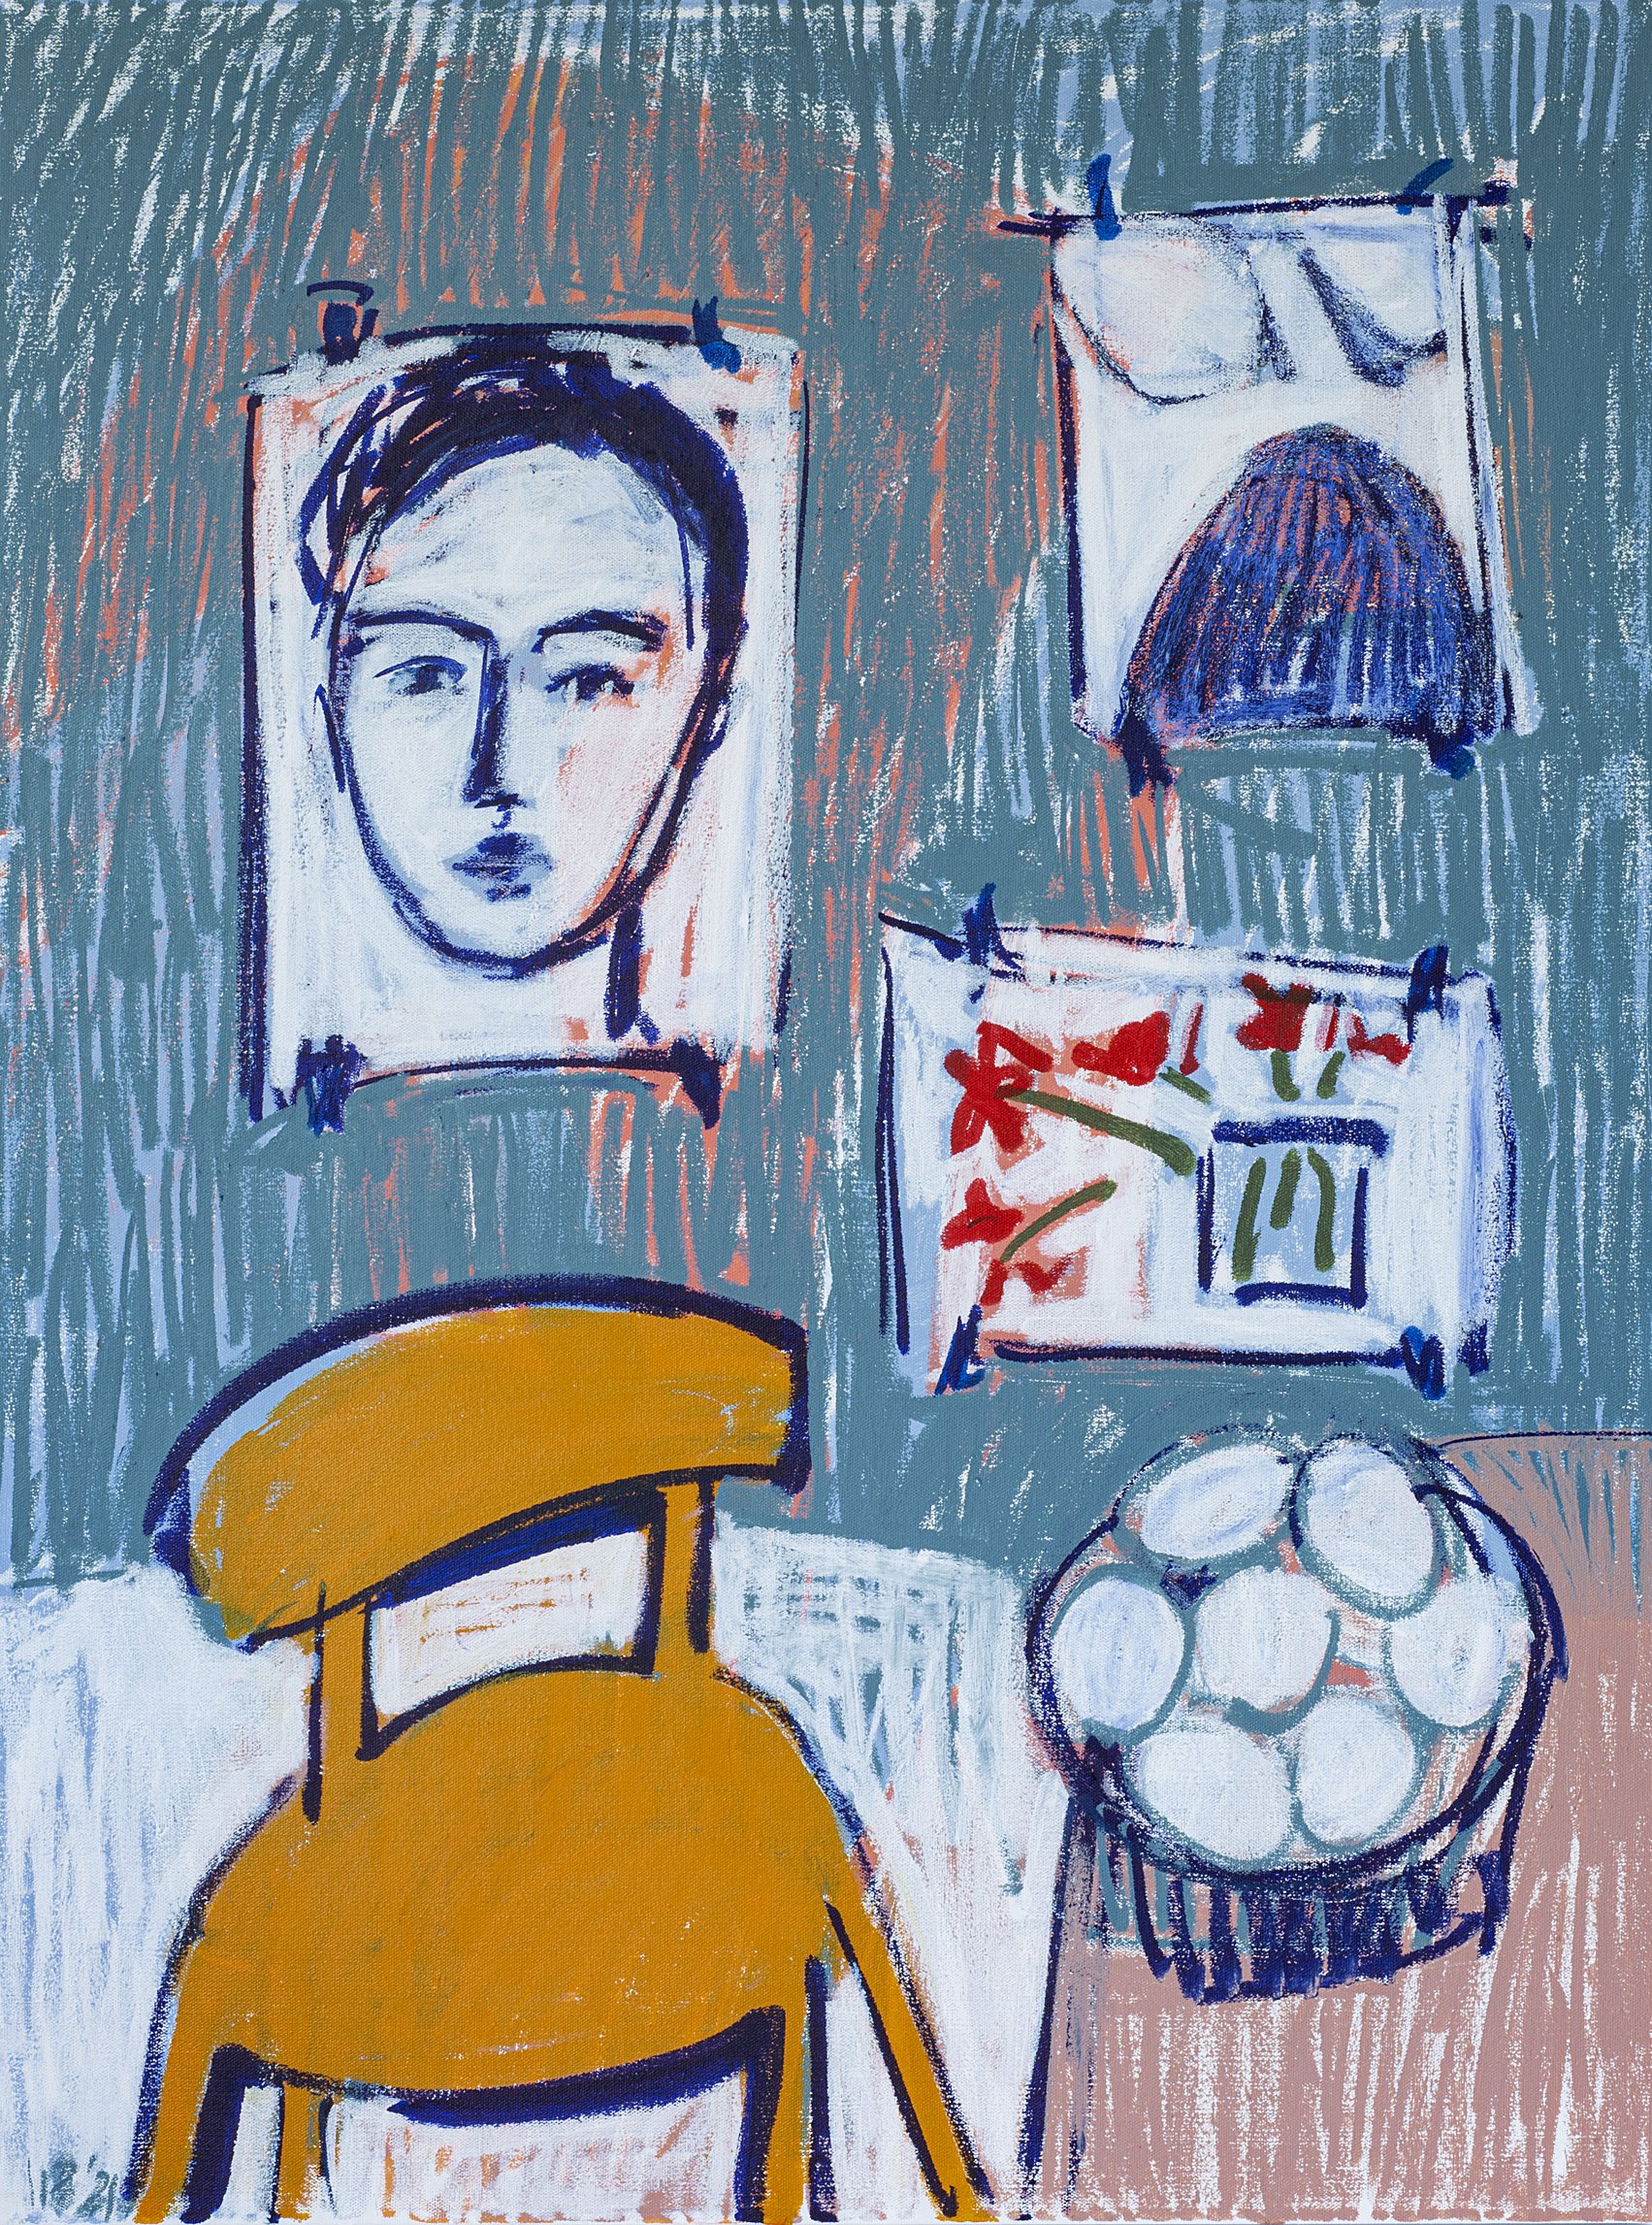 Interior with Self-portrait, Drawings and Bowl of Eggs, 2021 - tempera sticks, 30x40in